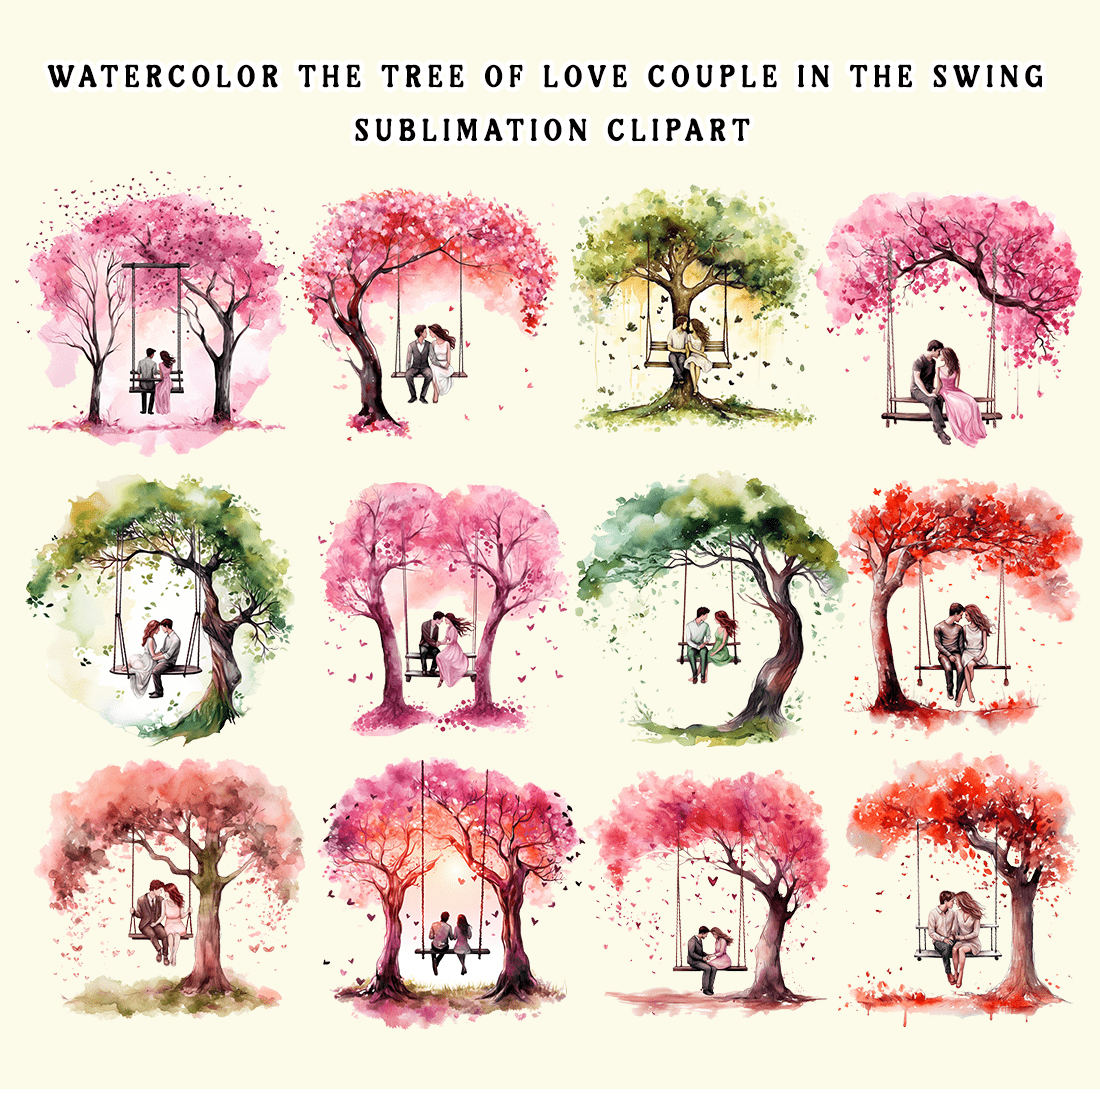 Watercolor The Tree of Love Couple in the Swing Sublimation Clipart preview image.